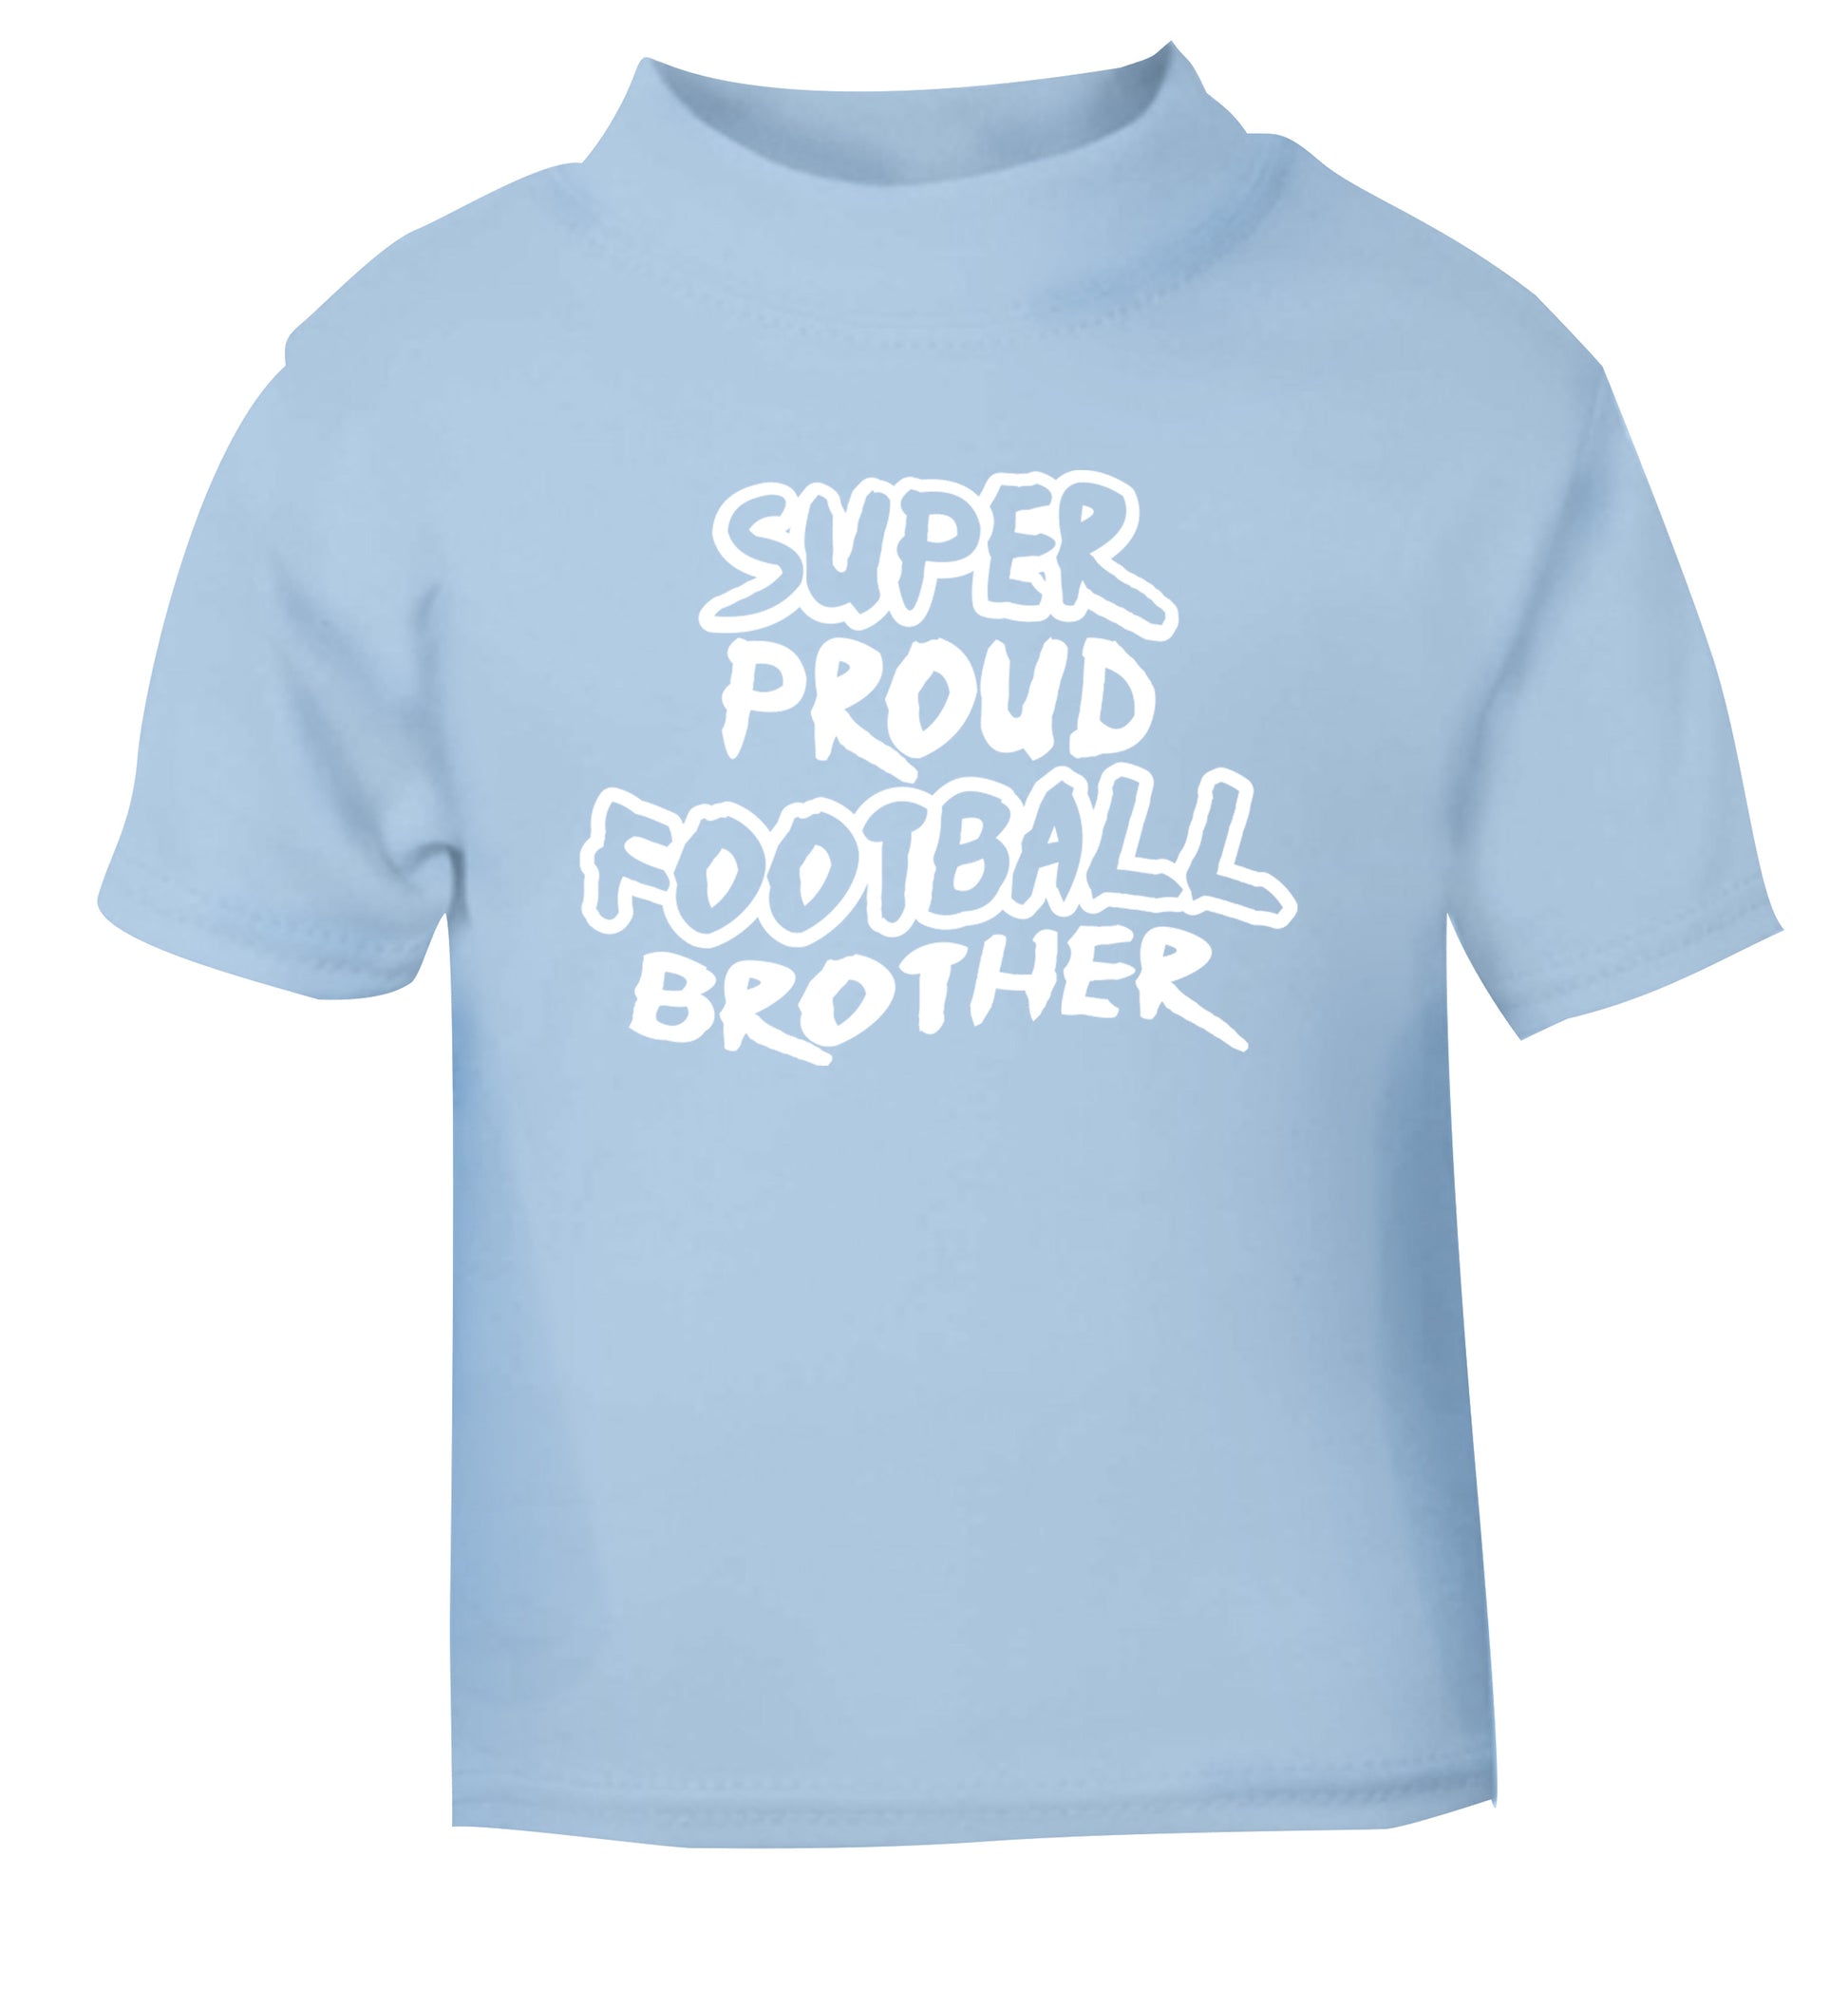 Super proud football brother light blue Baby Toddler Tshirt 2 Years